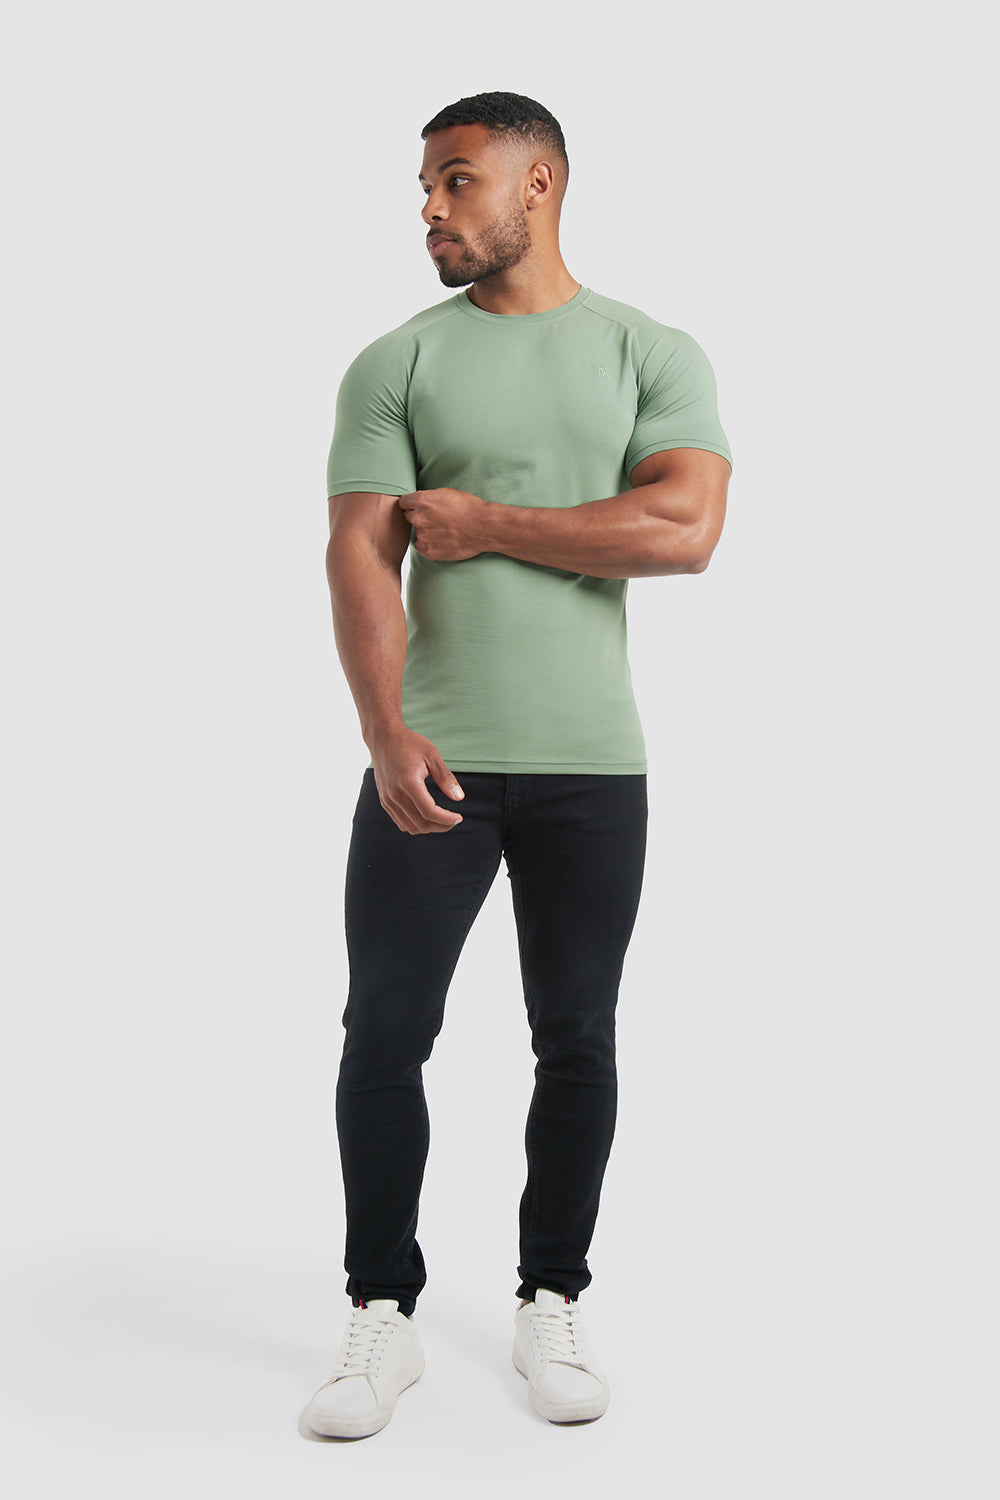 Muscle Fit T-Shirt in Thyme - TAILORED ATHLETE - ROW